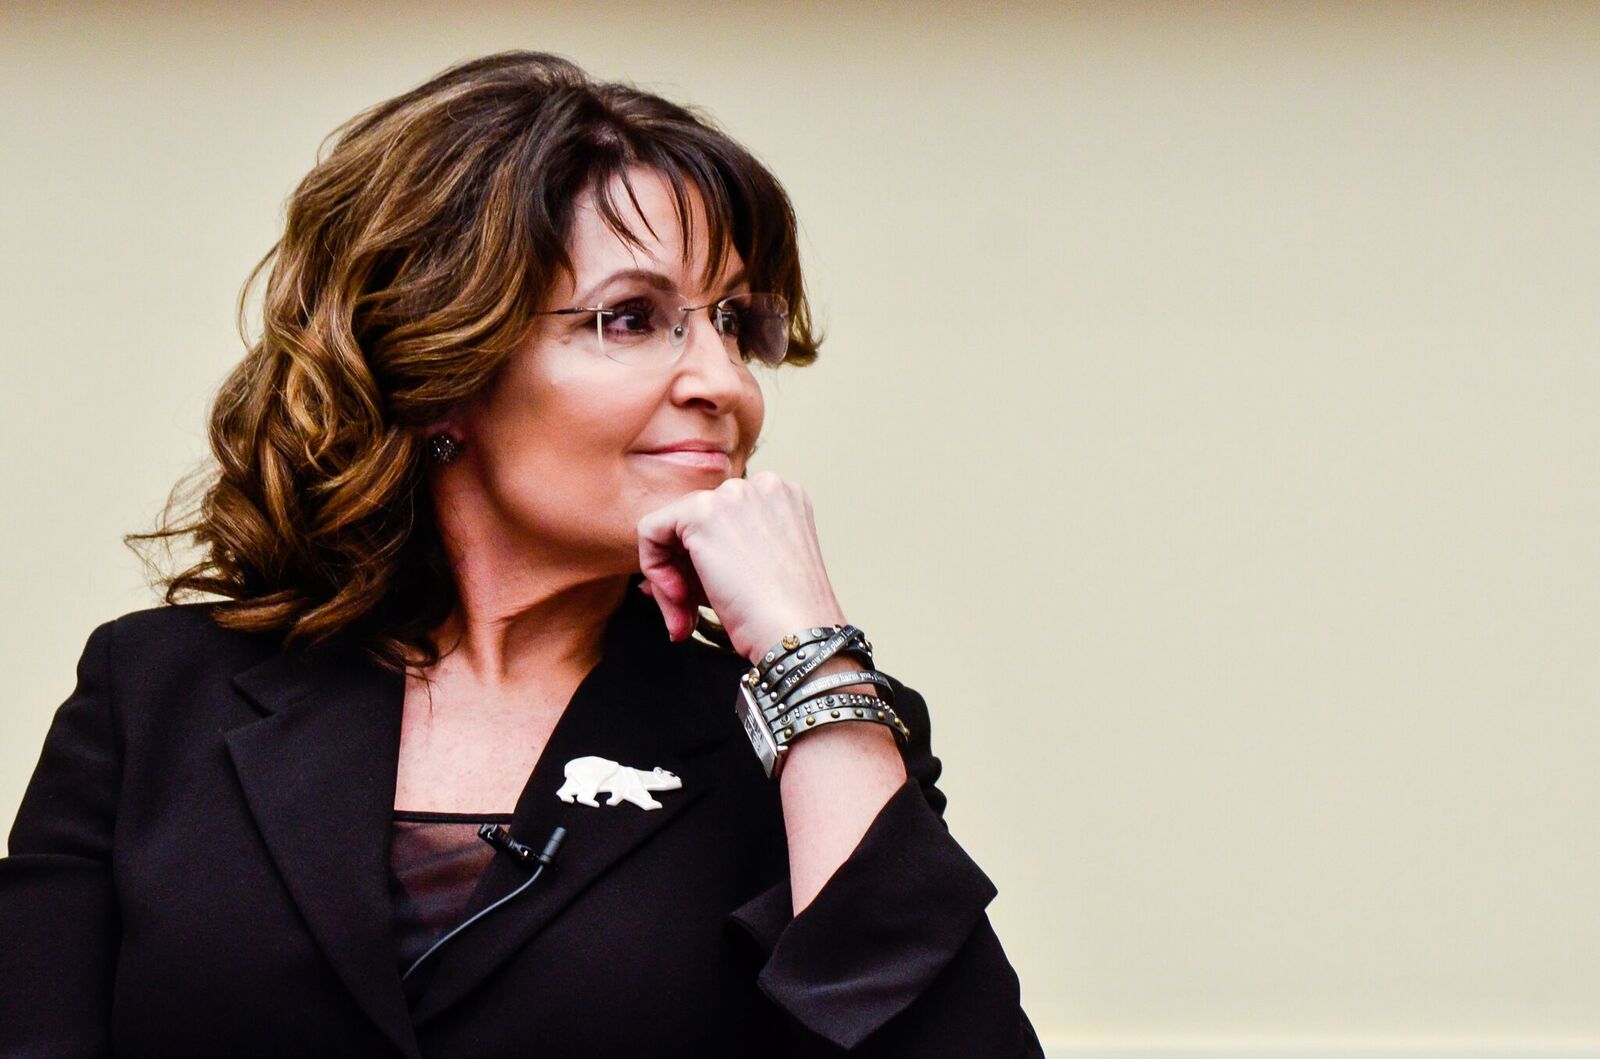  Former Governor Sarah Palin speaks during the "Climate Hustle" panel discussion at the Rayburn House Office Building on April 14, 2016 in Washington, DC | Photo: Getty Images